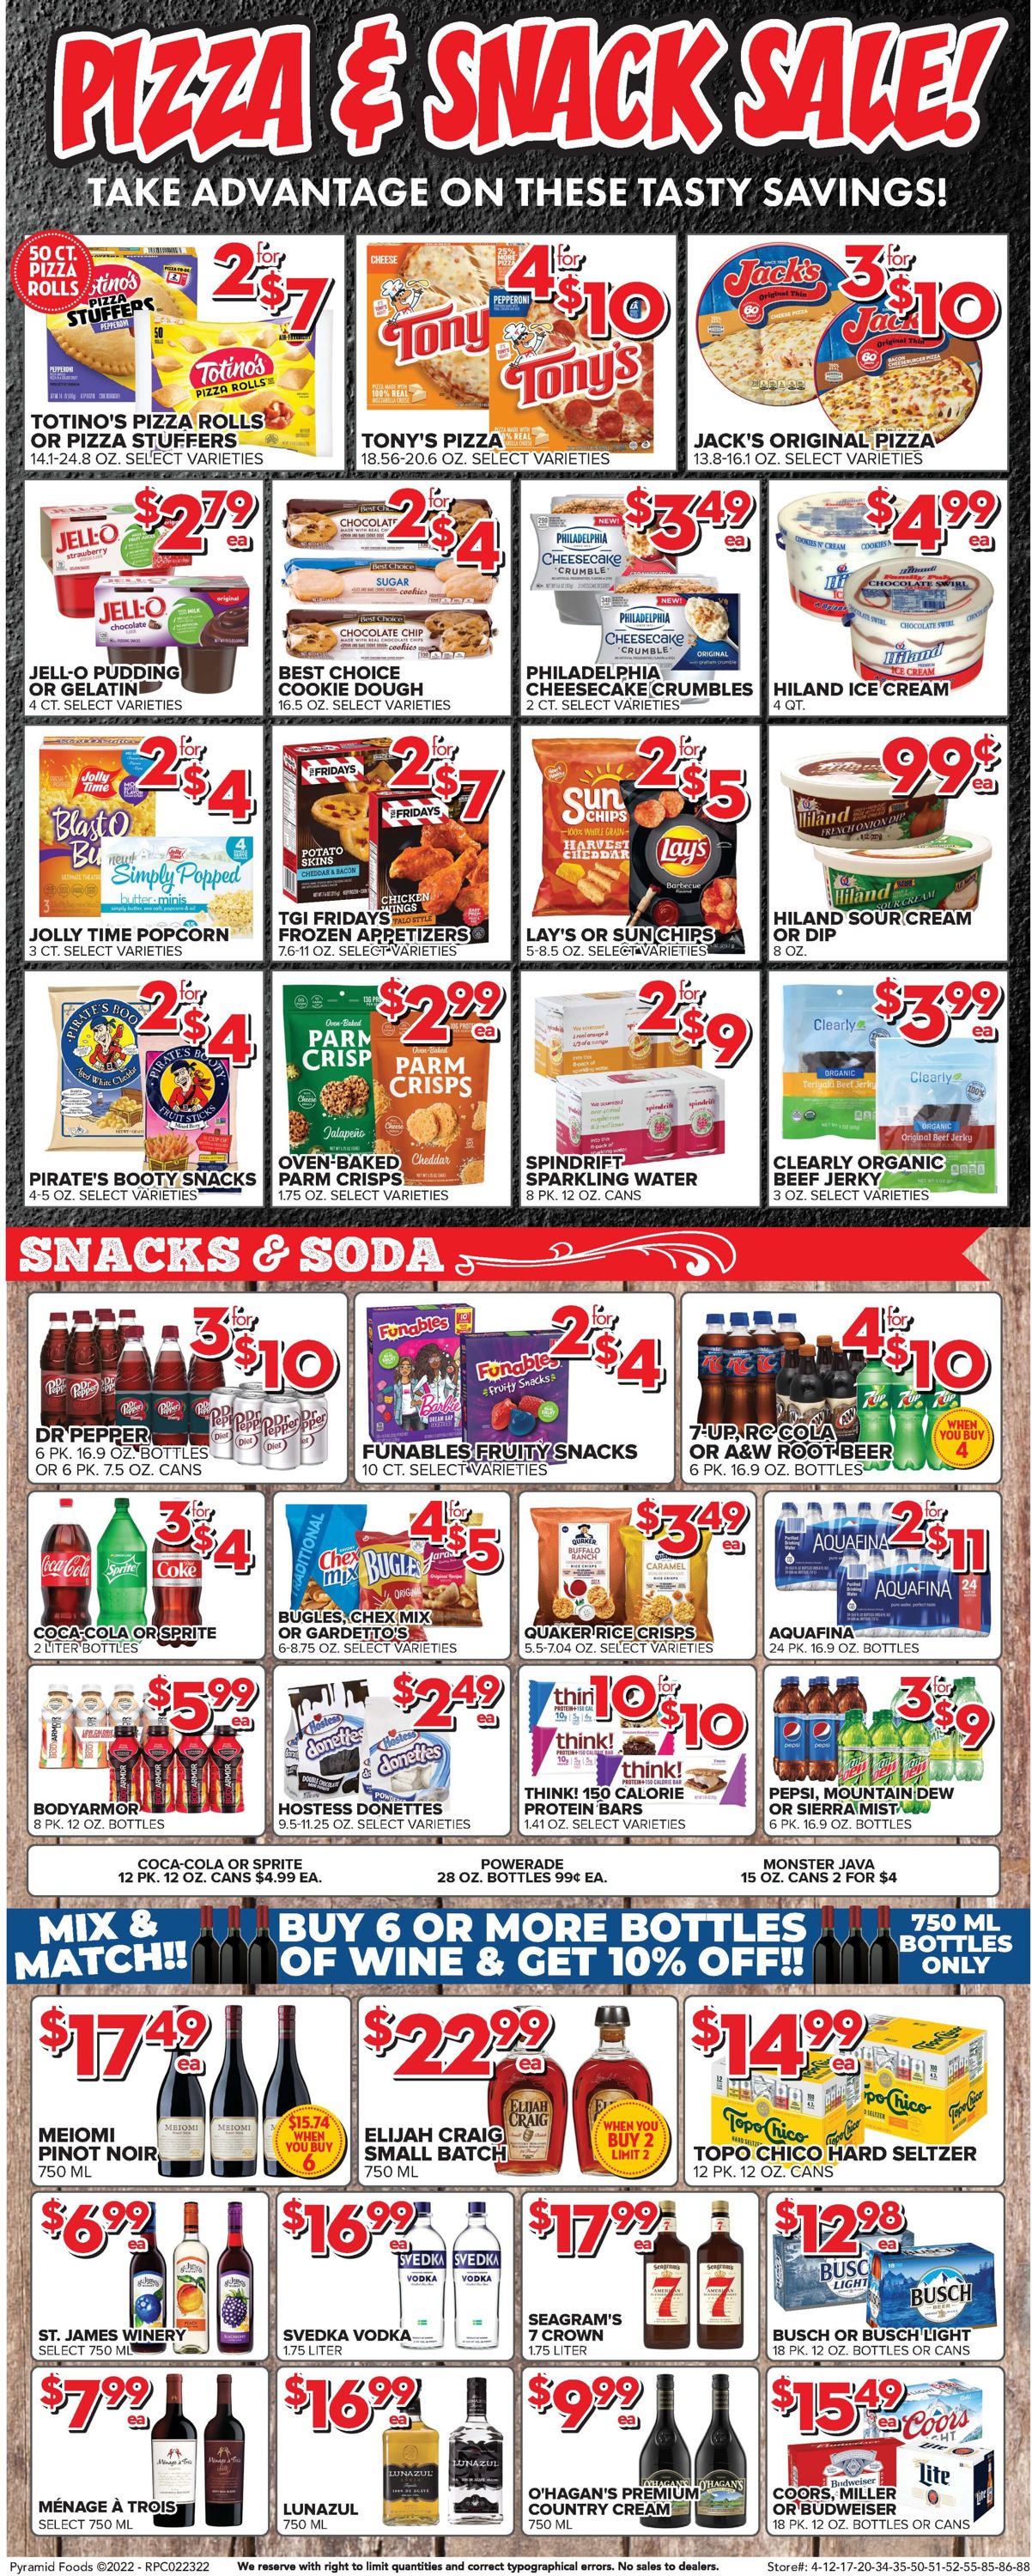 Price Cutter Weekly Ad Circular - valid 02/23-03/01/2022 (Page 6)